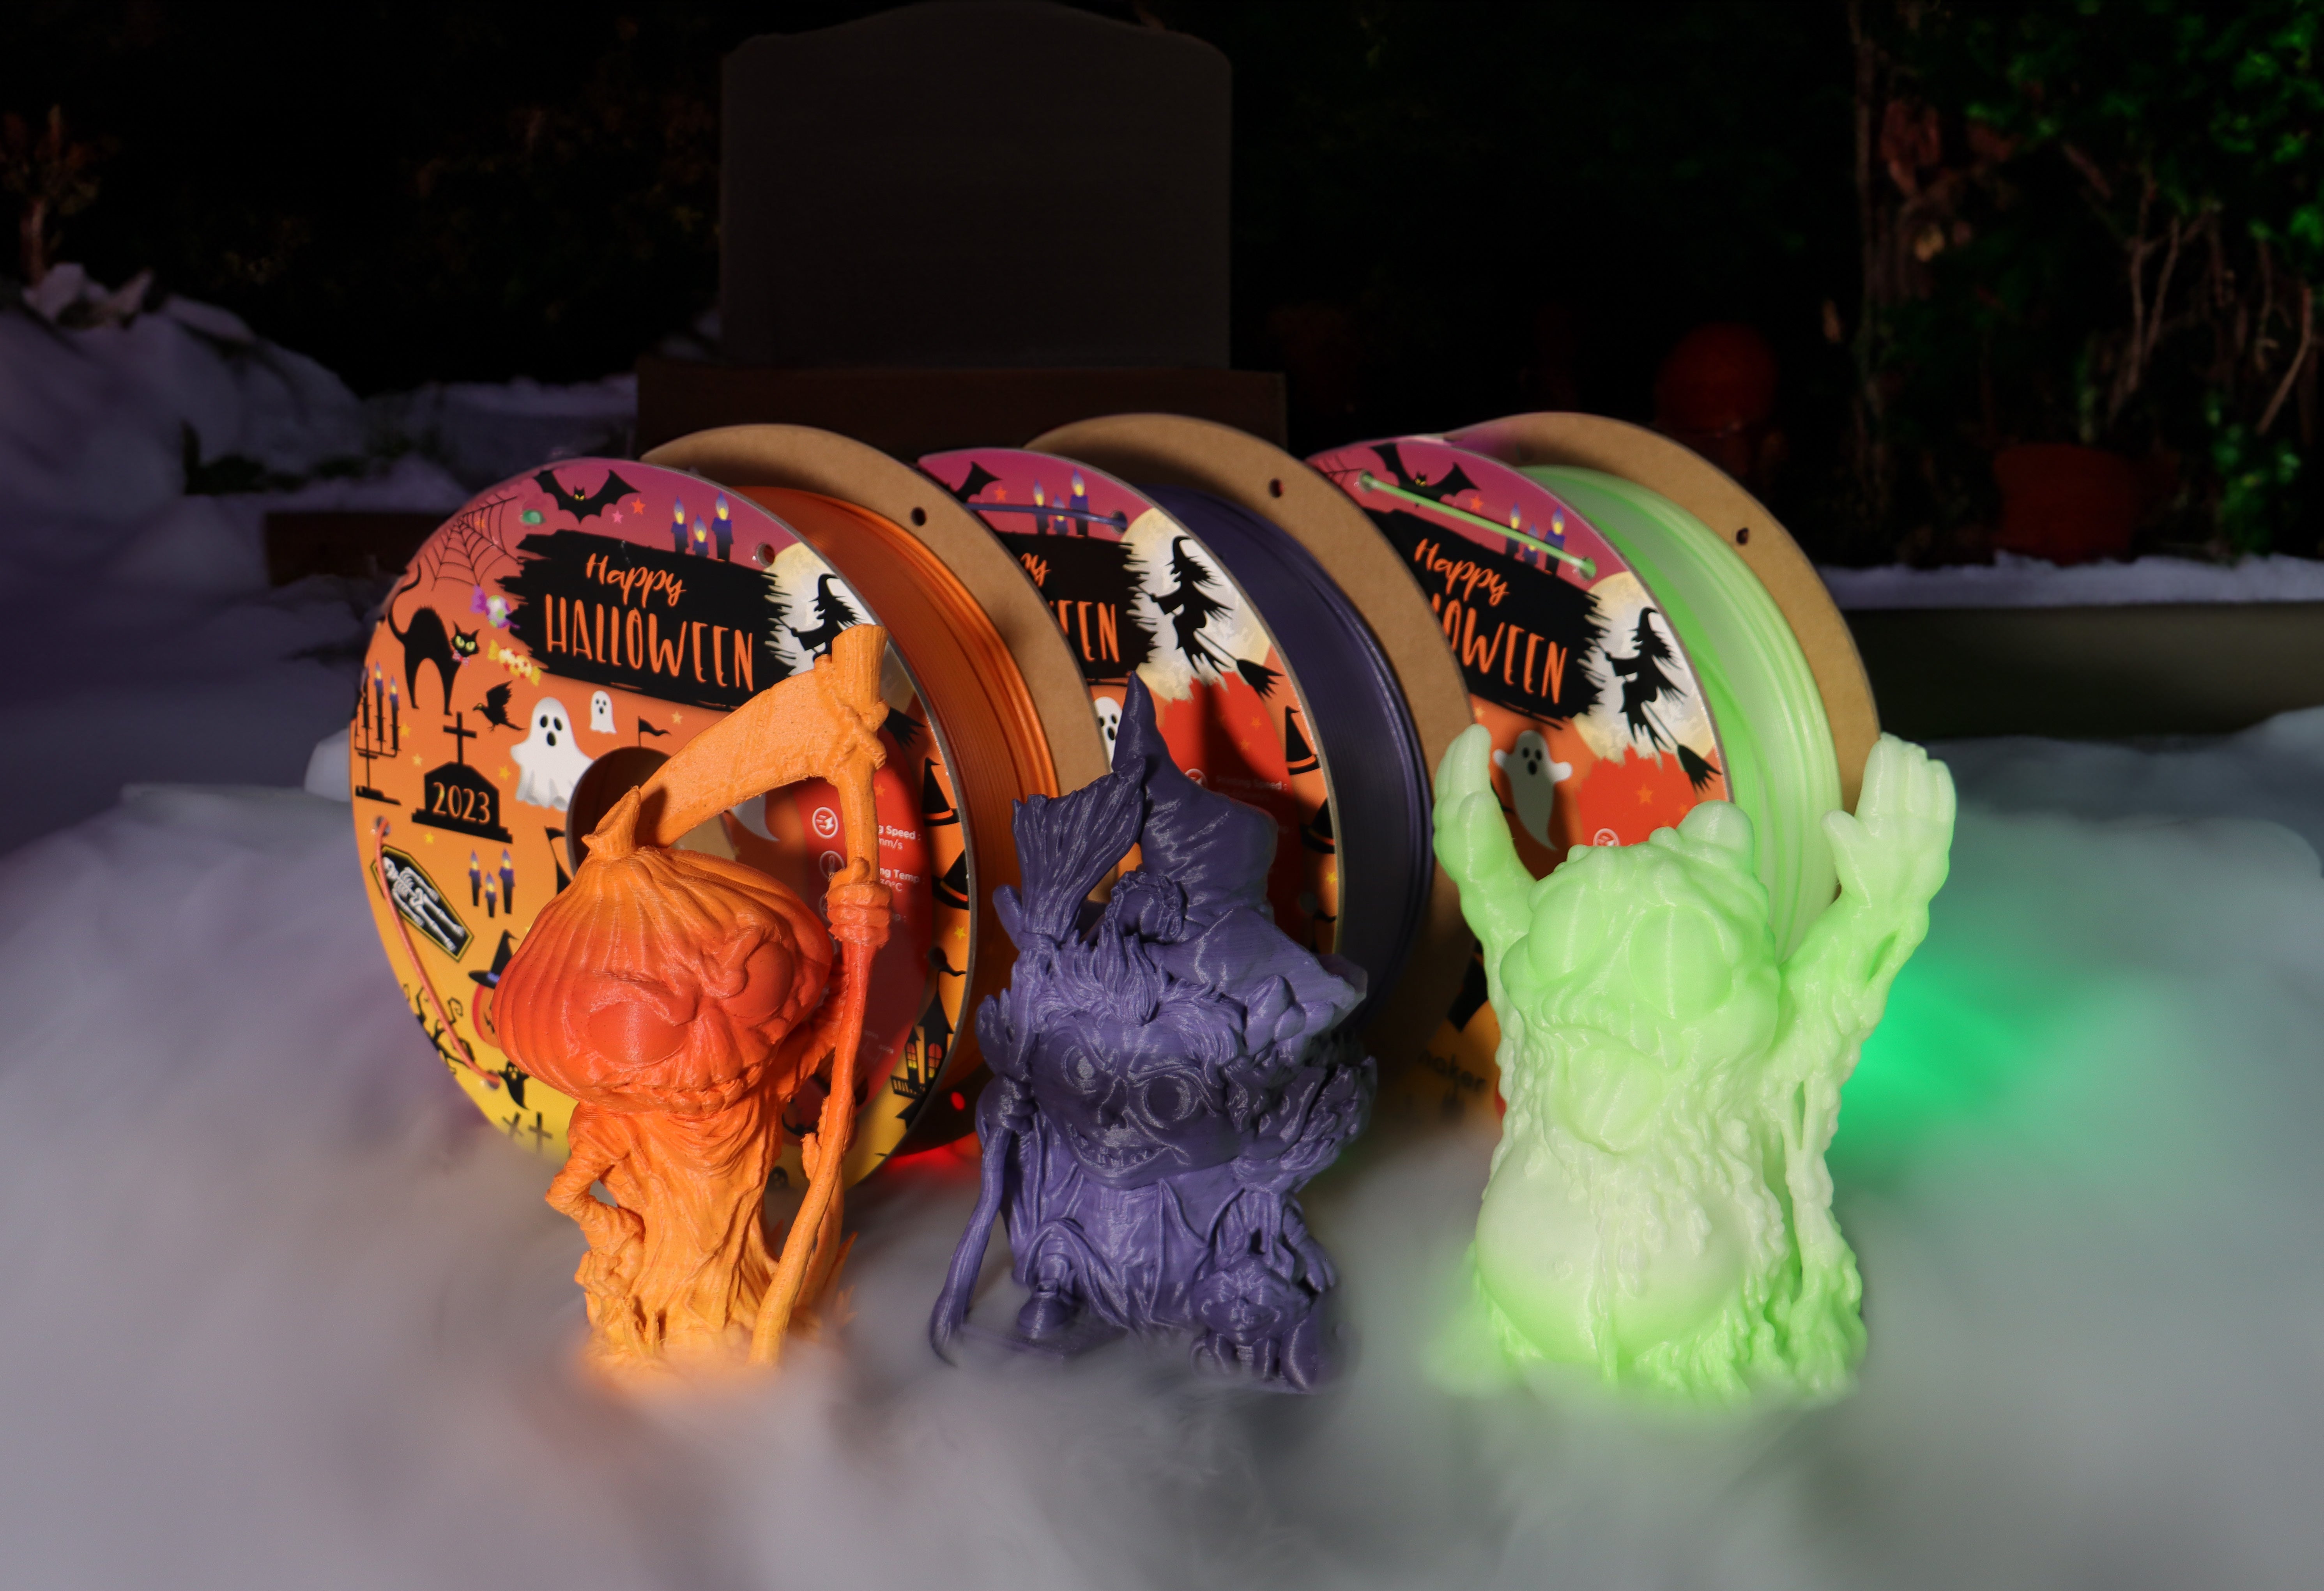 Polymaker Limited Edition Halloween Filament Pack - 3x 1kg